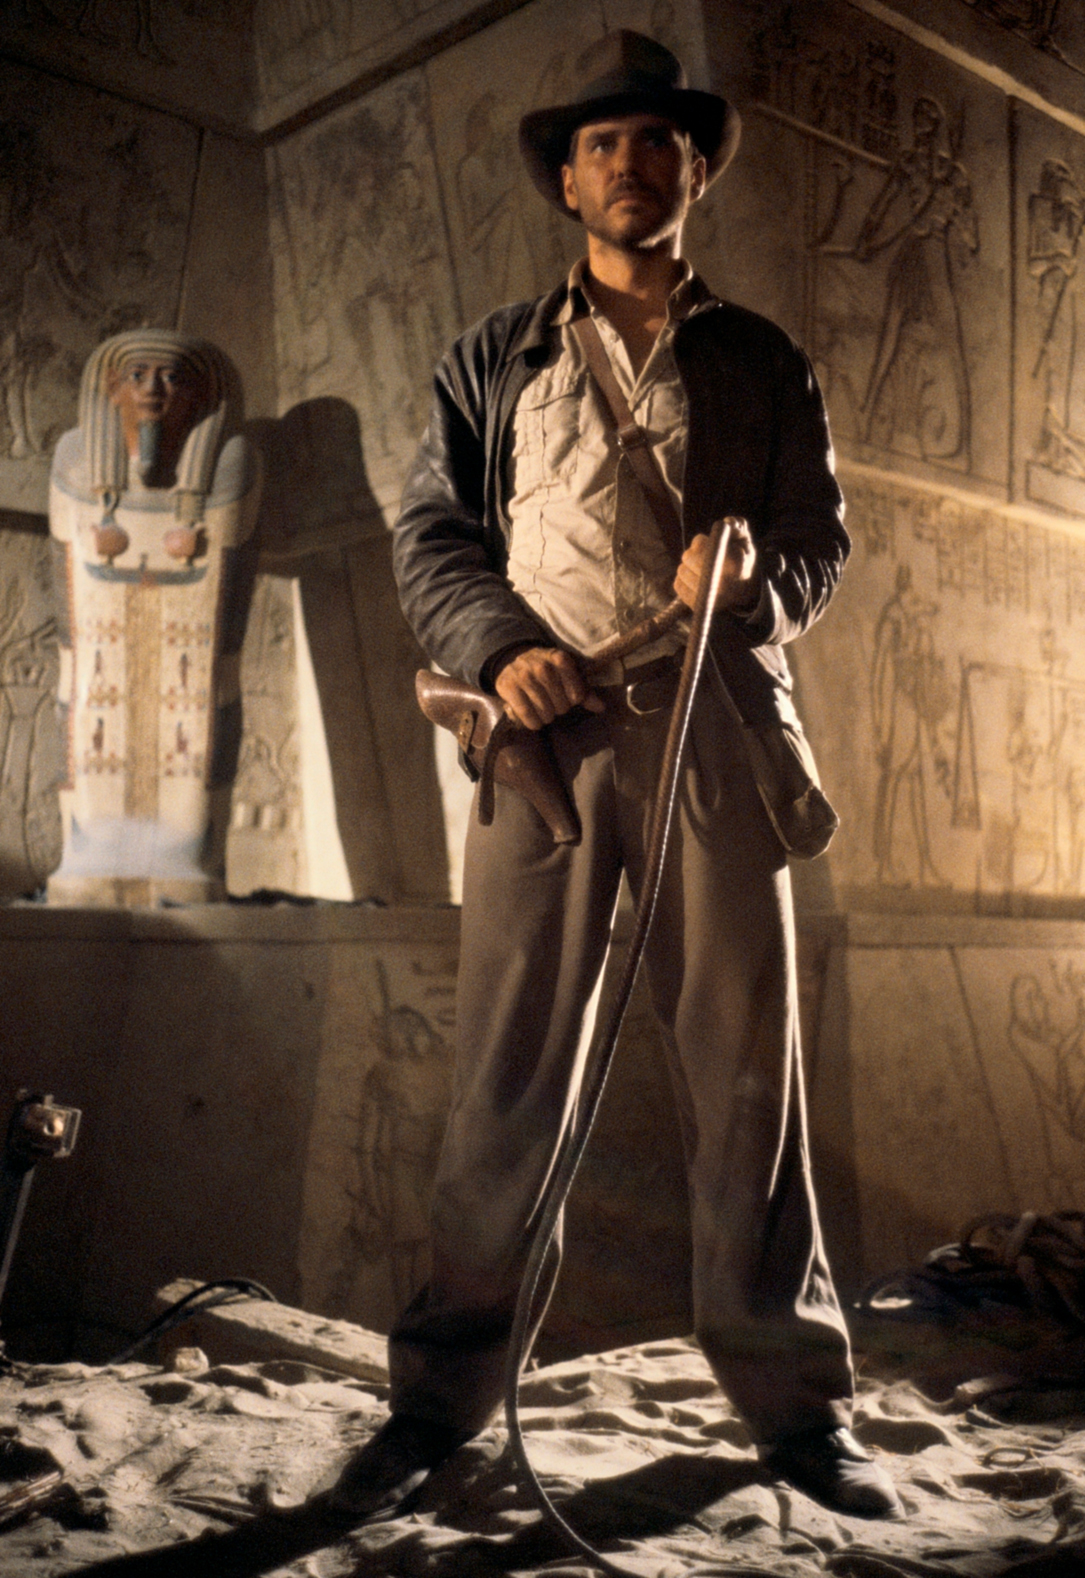 Harrison Ford in Indiana Jones and the “Raiders of the Lost Ark” (1981)